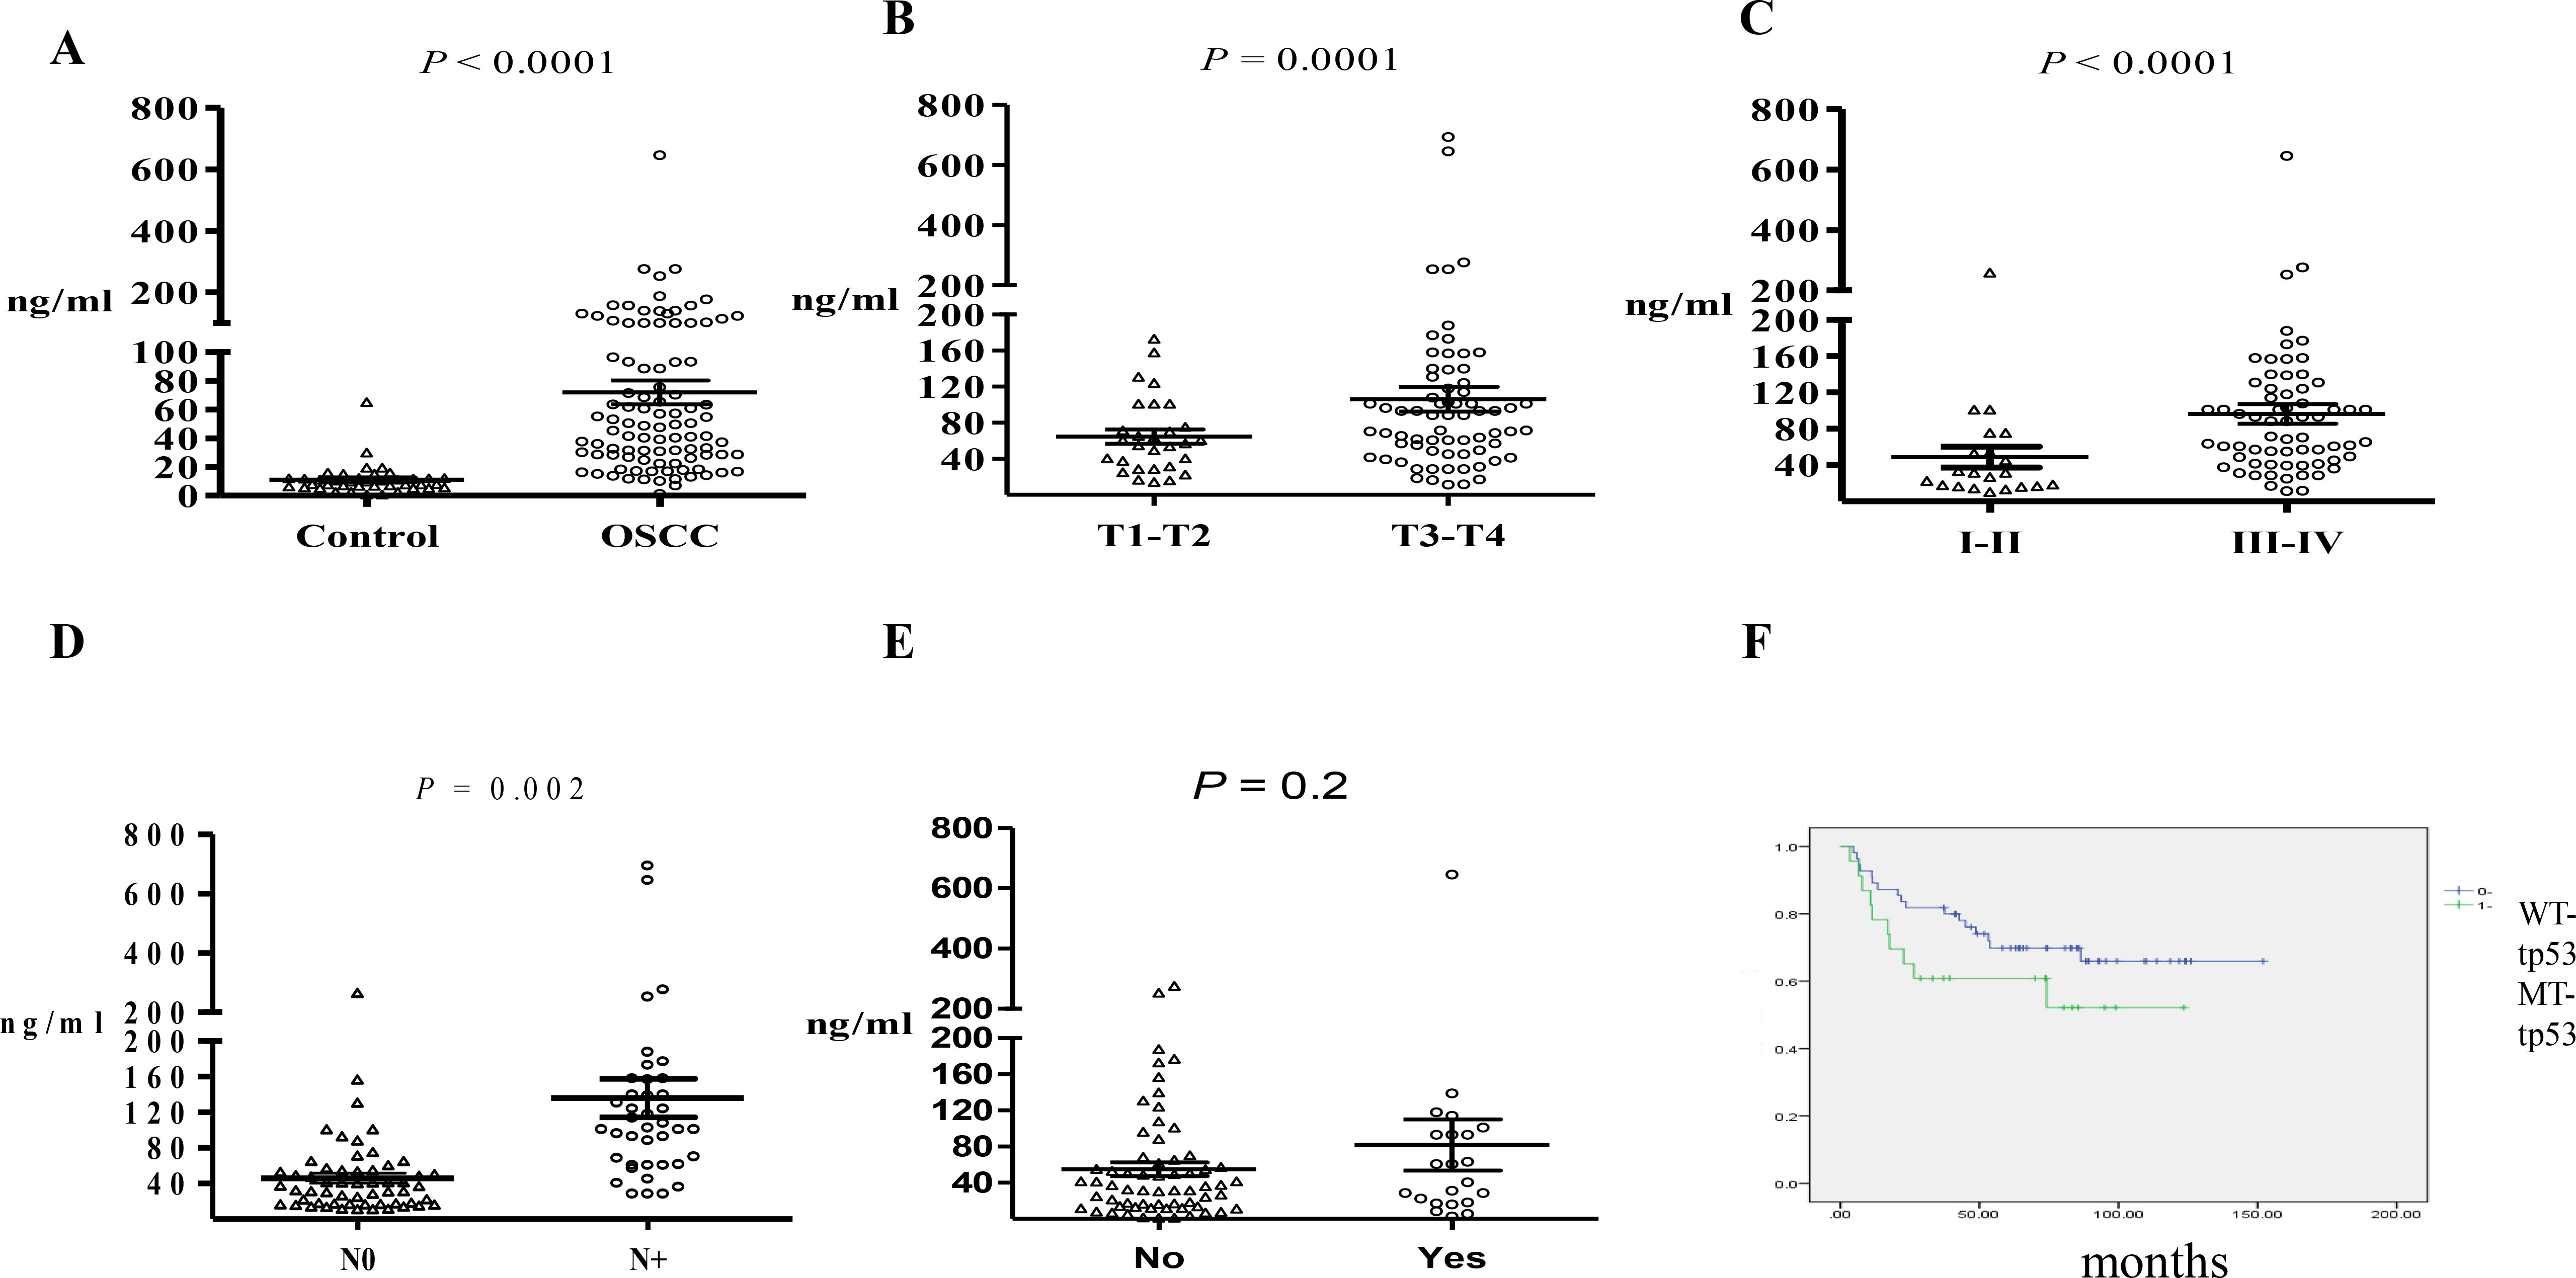 Comparison of cfDNA plasma levels in (A) healthy controls versus patients with OSCC preoperatively; (B) patients with different tumor sizes preoperatively; (C) patients without metastasis in the neck lymph nodes; (D) patients with early- and late-stage carcinoma; and (E) patients with different statuses of lymphovascular invasion. (F) Kaplan-Meier analysis of patients with MT-TP53 and WT-TP53. Scatter plots displaying mean ± standard deviation were calculated by the Mann-Whitney test.